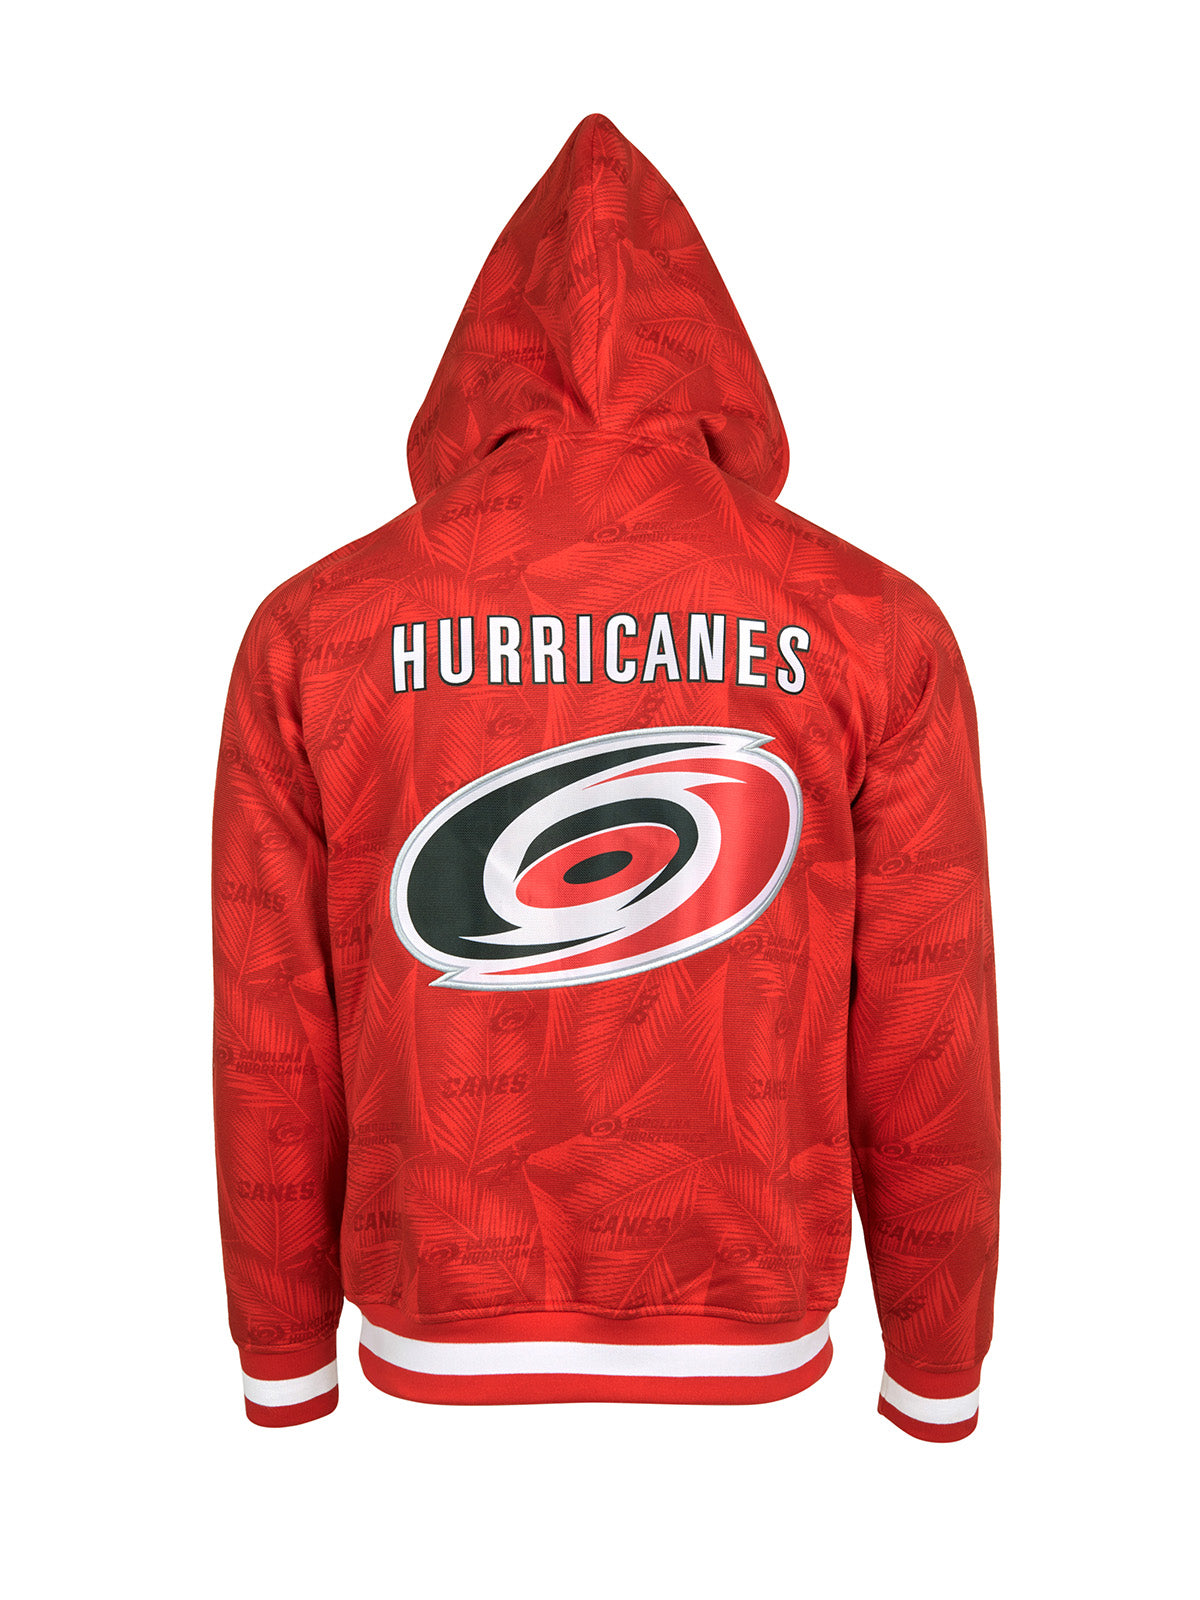 Carolina Hurricanes Hoodie - Show your team spirit, with the iconic team logo patch on the back, and proudly display your Carolina Hurricanes support in their team colors with this NHL hockey hoodie.